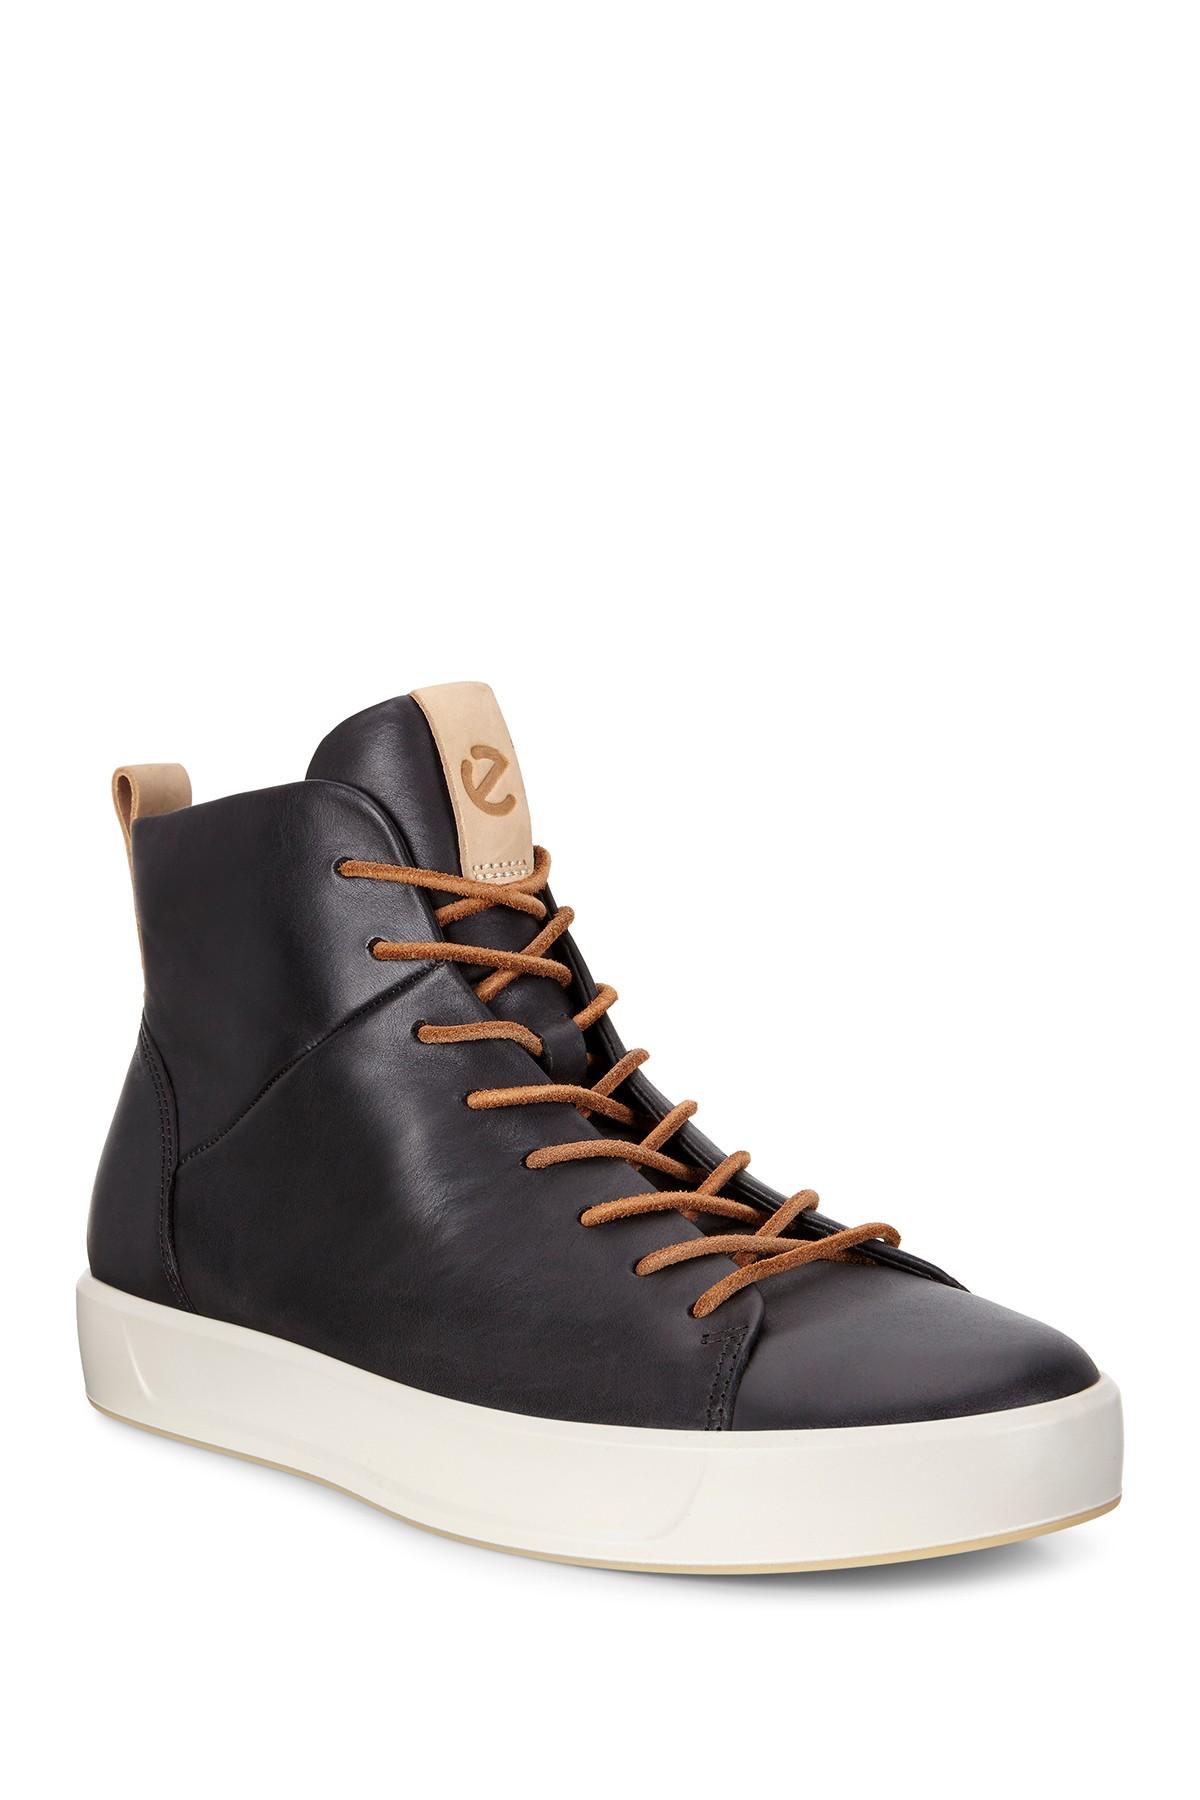 Ecco Leather Soft 8 Lx High Top Sneaker for Men - Lyst